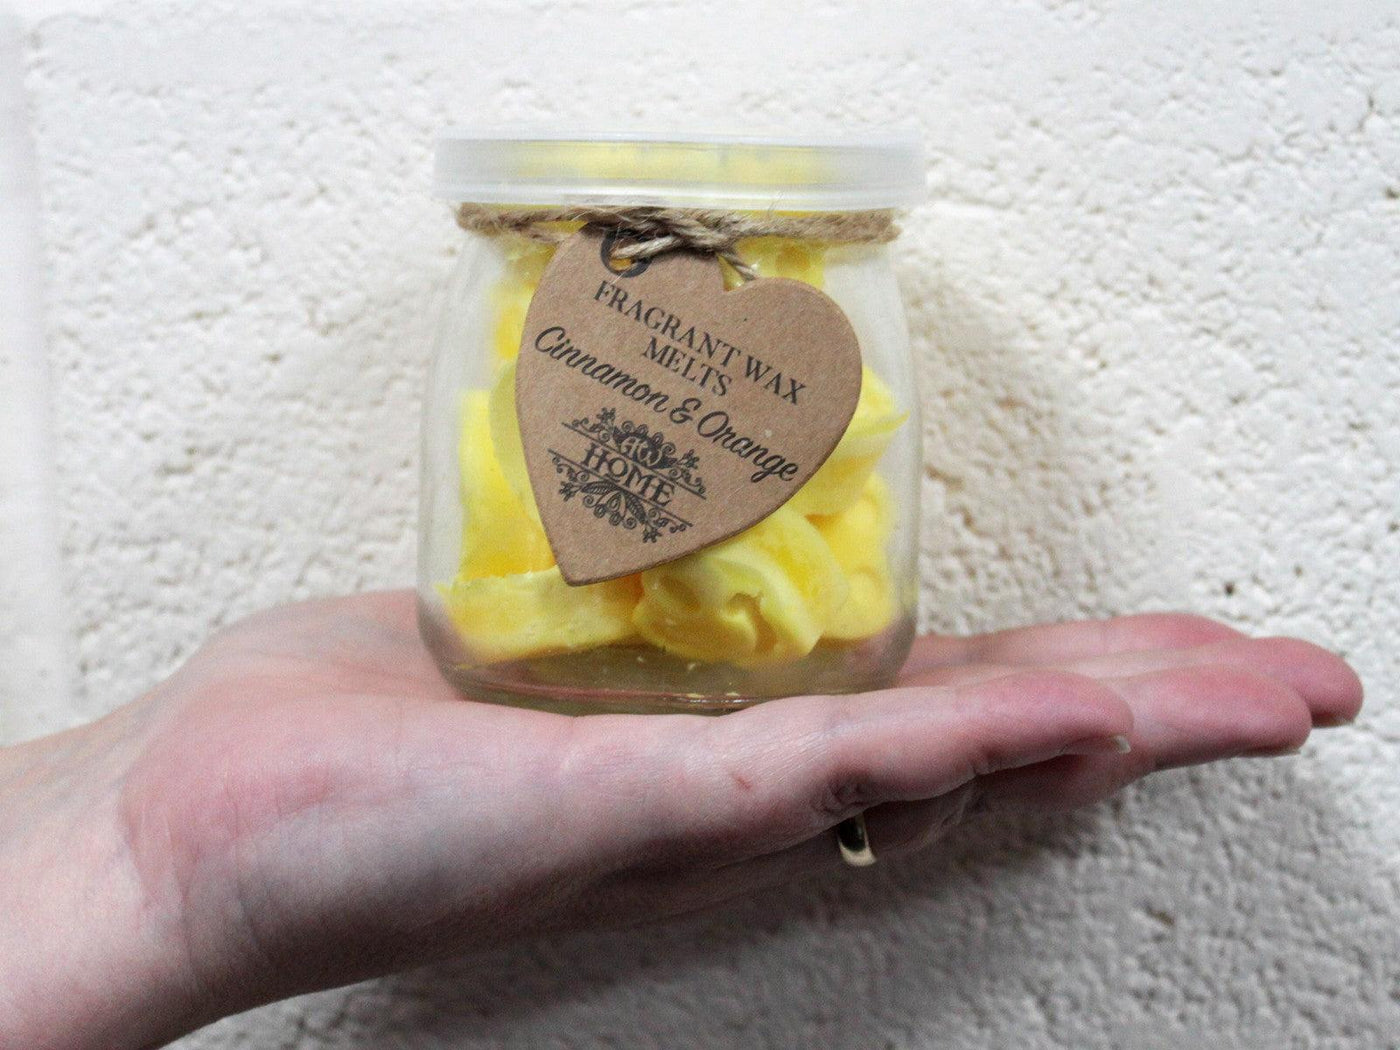 Natural Soy Fragrance Oil Heart Wax Melts - White Musk.